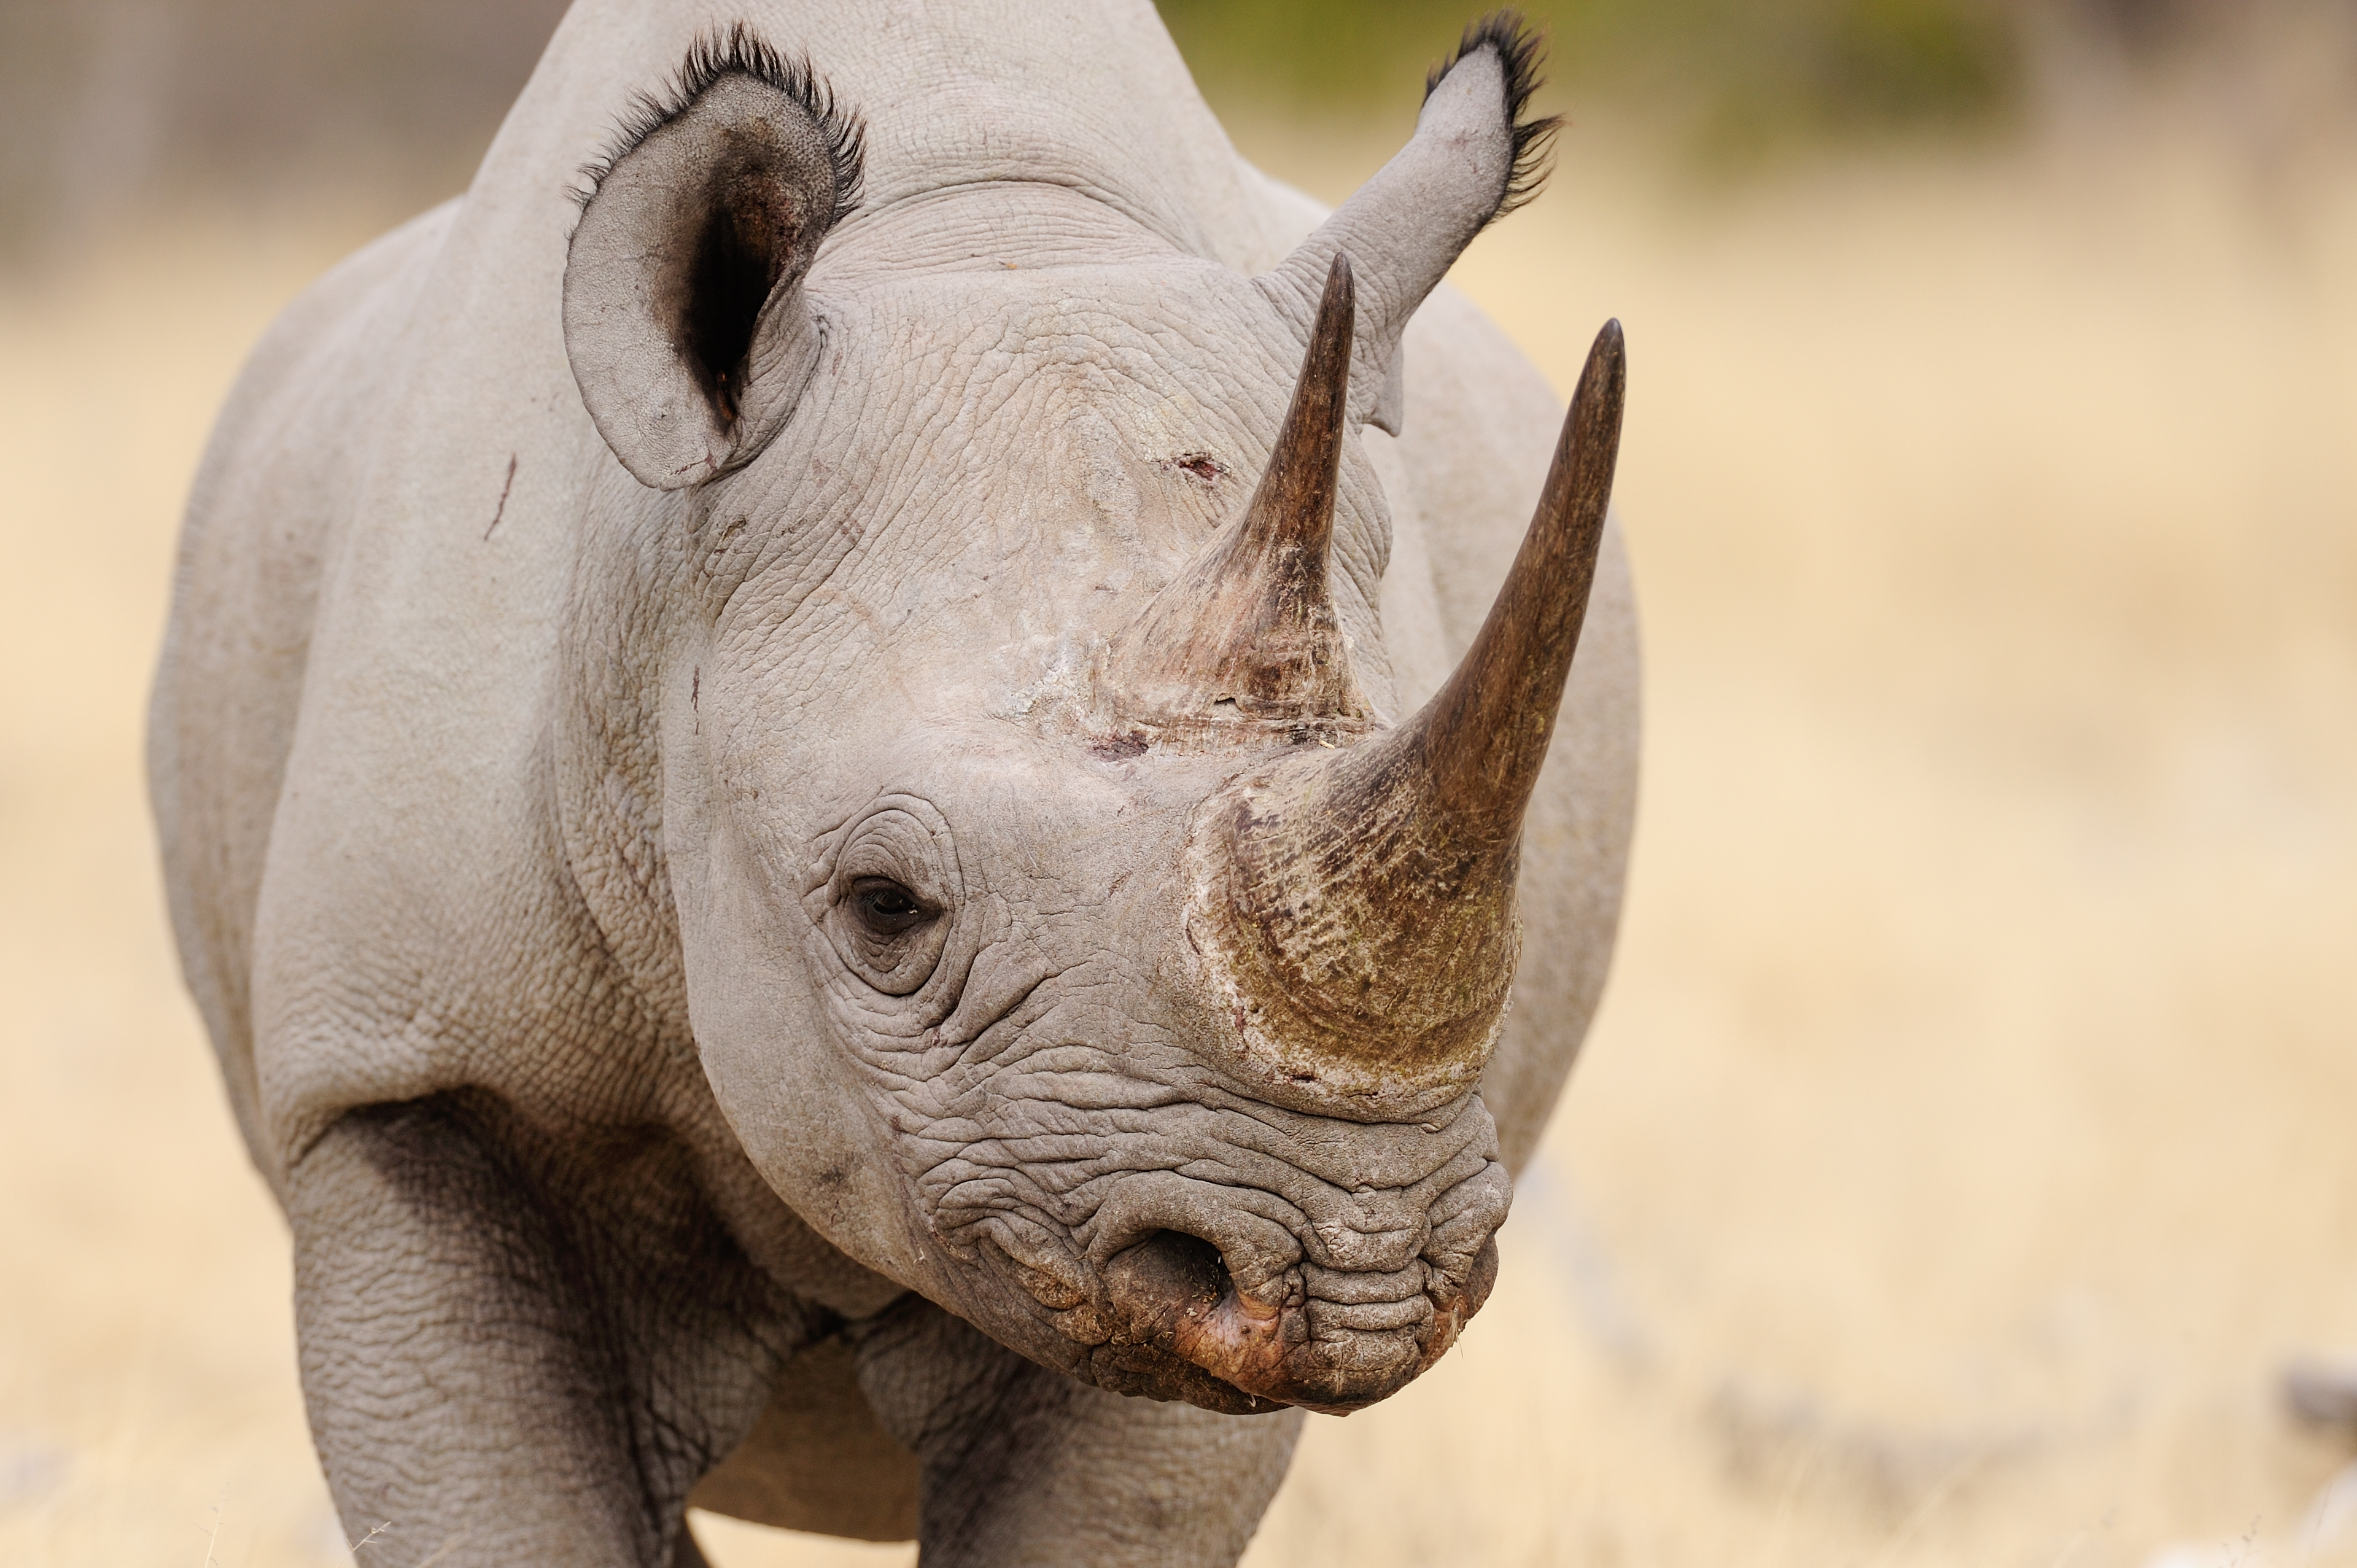 Conservationists are now taking some pretty drastic measures to save rhinos